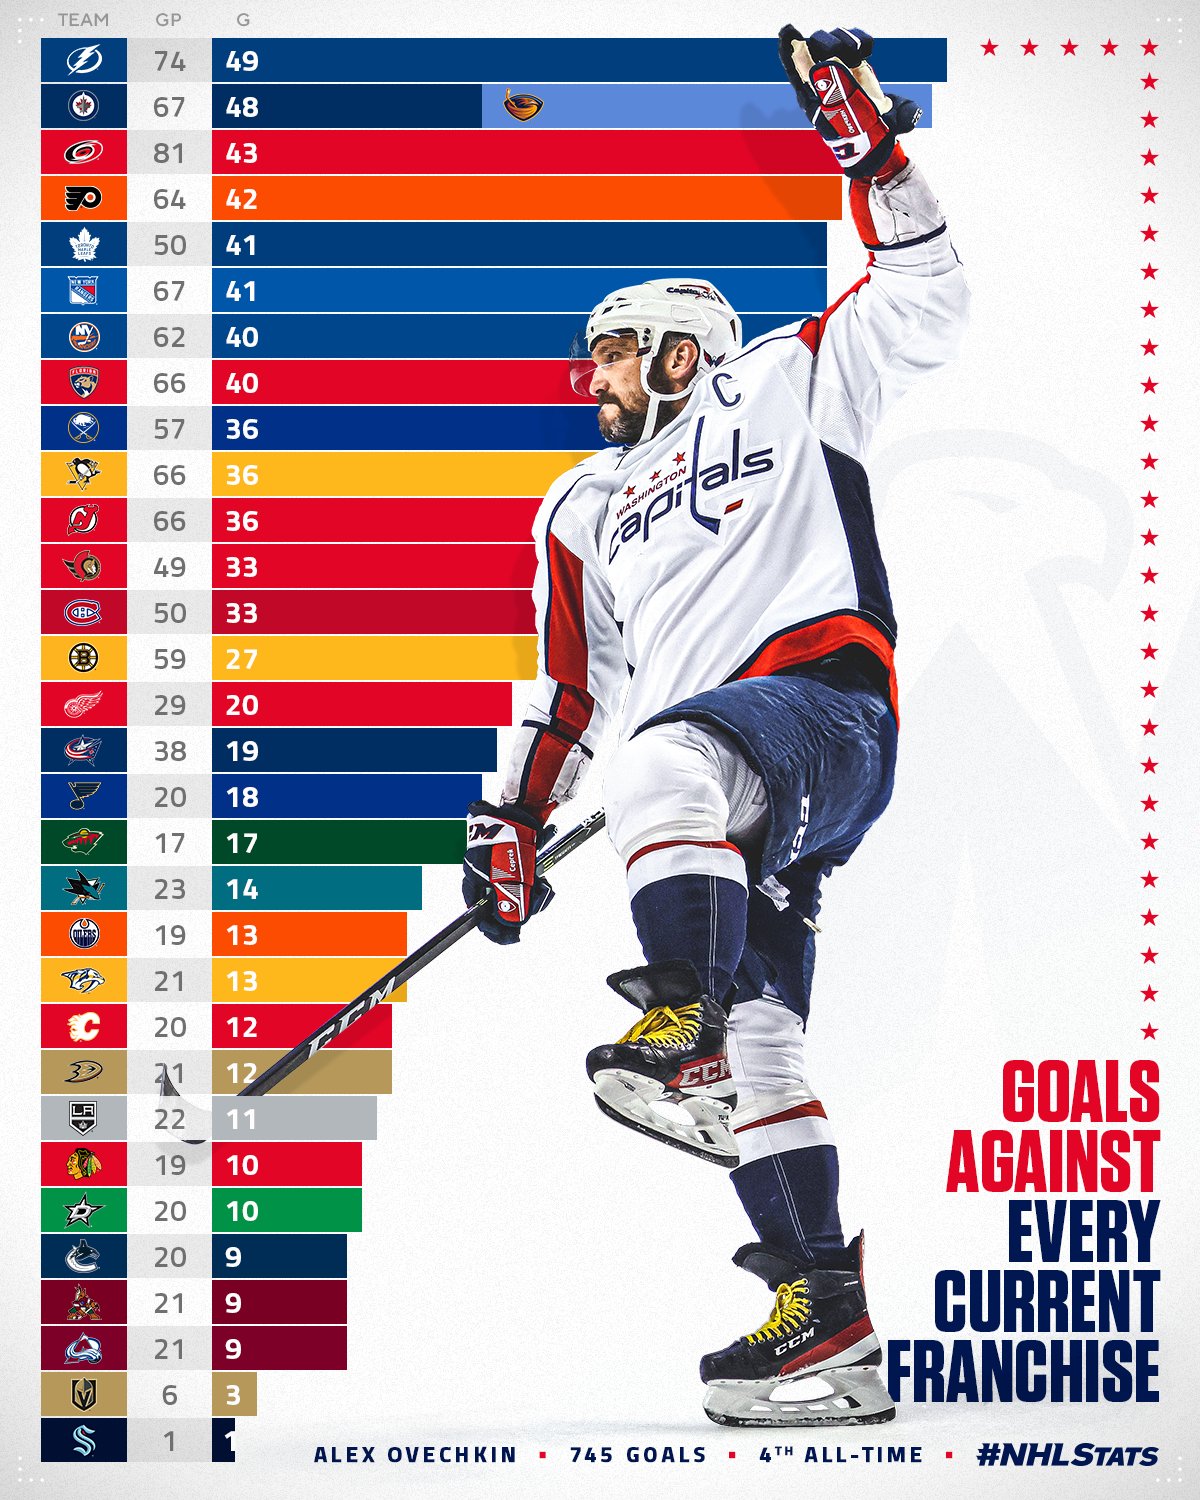 NHL Public Relations on X: Not only did @ovi8 jump over multiple Hall of  Fame legends on the all-time goals list this past year, he also had the top  selling player jersey